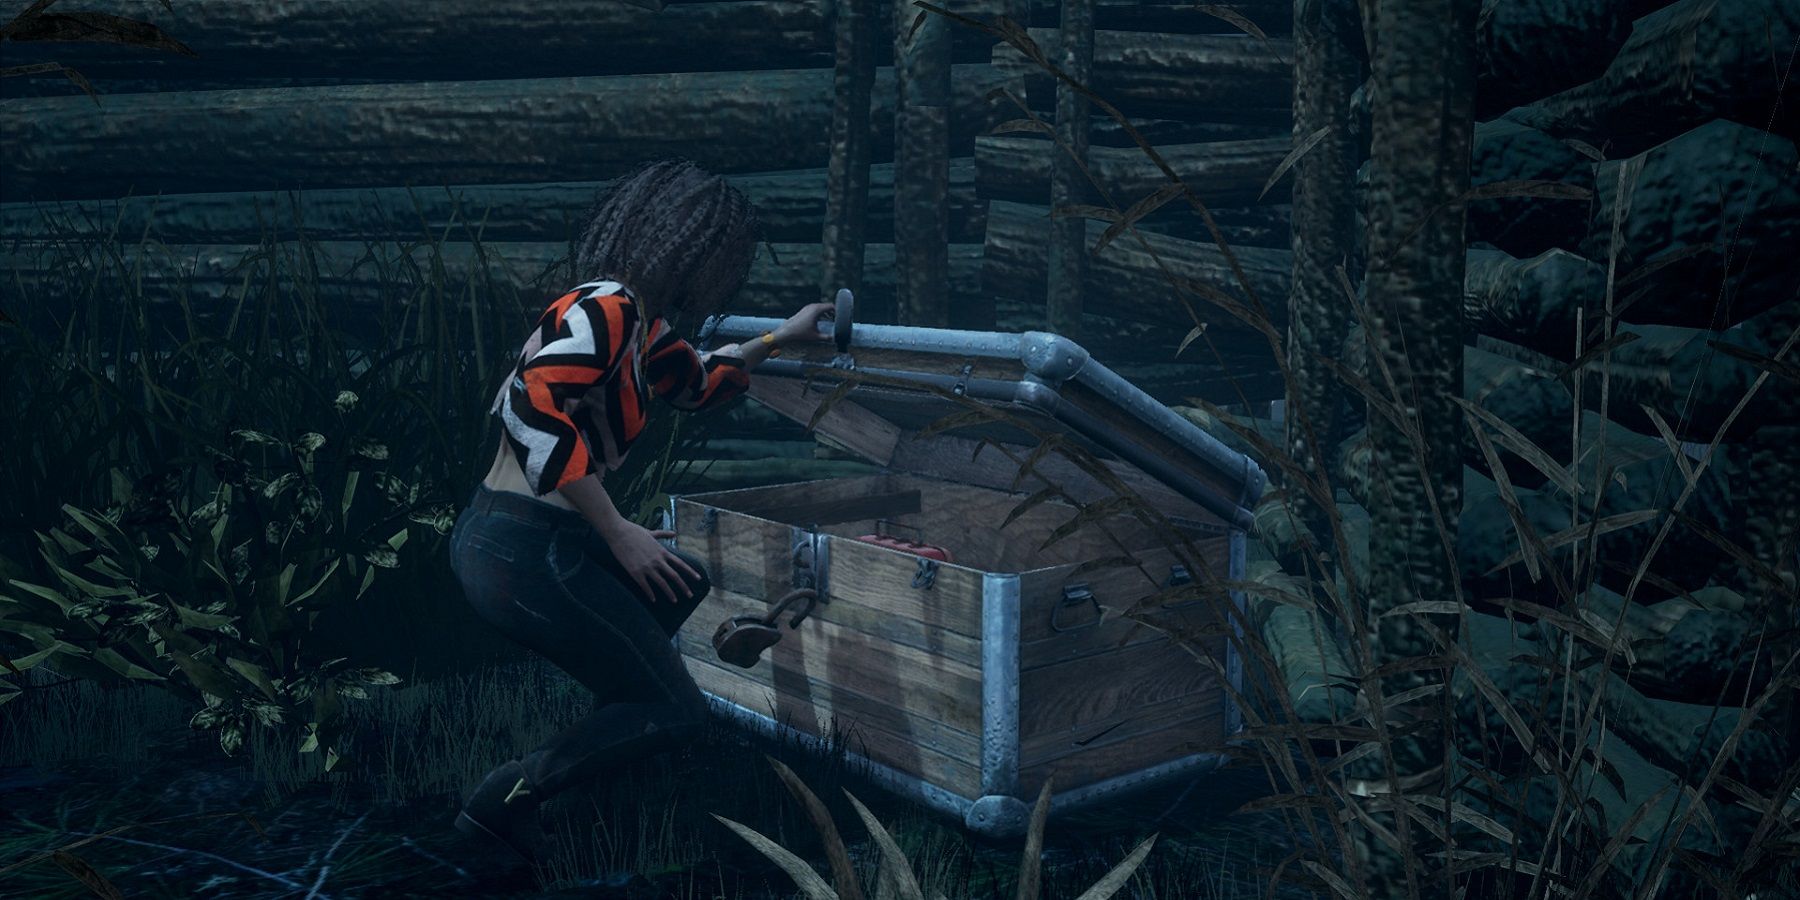 Screenshot from Dead by Daylight showing a survivor opening a chest.